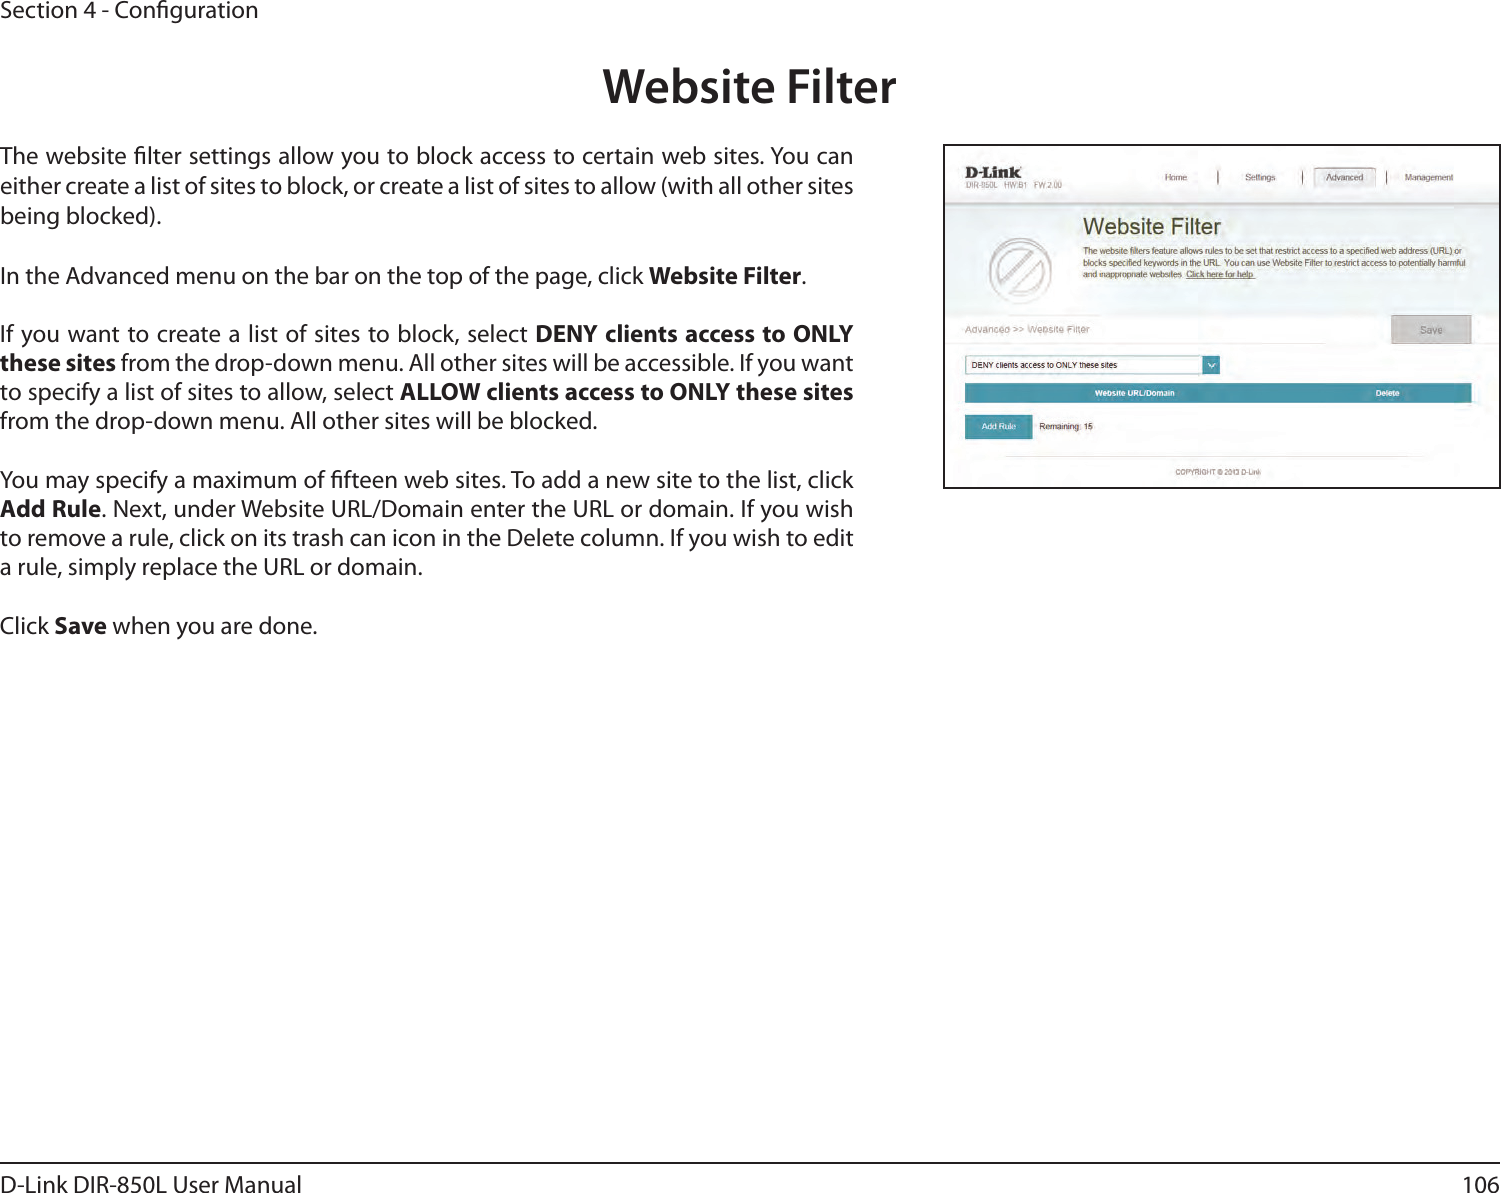 106D-Link DIR-850L User ManualSection 4 - CongurationWebsite FilterThe website lter settings allow you to block access to certain web sites. You can either create a list of sites to block, or create a list of sites to allow (with all other sites being blocked).In the Advanced menu on the bar on the top of the page, click Website Filter.If you want to create a list of sites to block, select DENY clients access to ONLY these sites from the drop-down menu. All other sites will be accessible. If you want to specify a list of sites to allow, select ALLOW clients access to ONLY these sites from the drop-down menu. All other sites will be blocked.You may specify a maximum of fteen web sites. To add a new site to the list, click Add Rule. Next, under Website URL/Domain enter the URL or domain. If you wish to remove a rule, click on its trash can icon in the Delete column. If you wish to edit a rule, simply replace the URL or domain.Click Save when you are done.